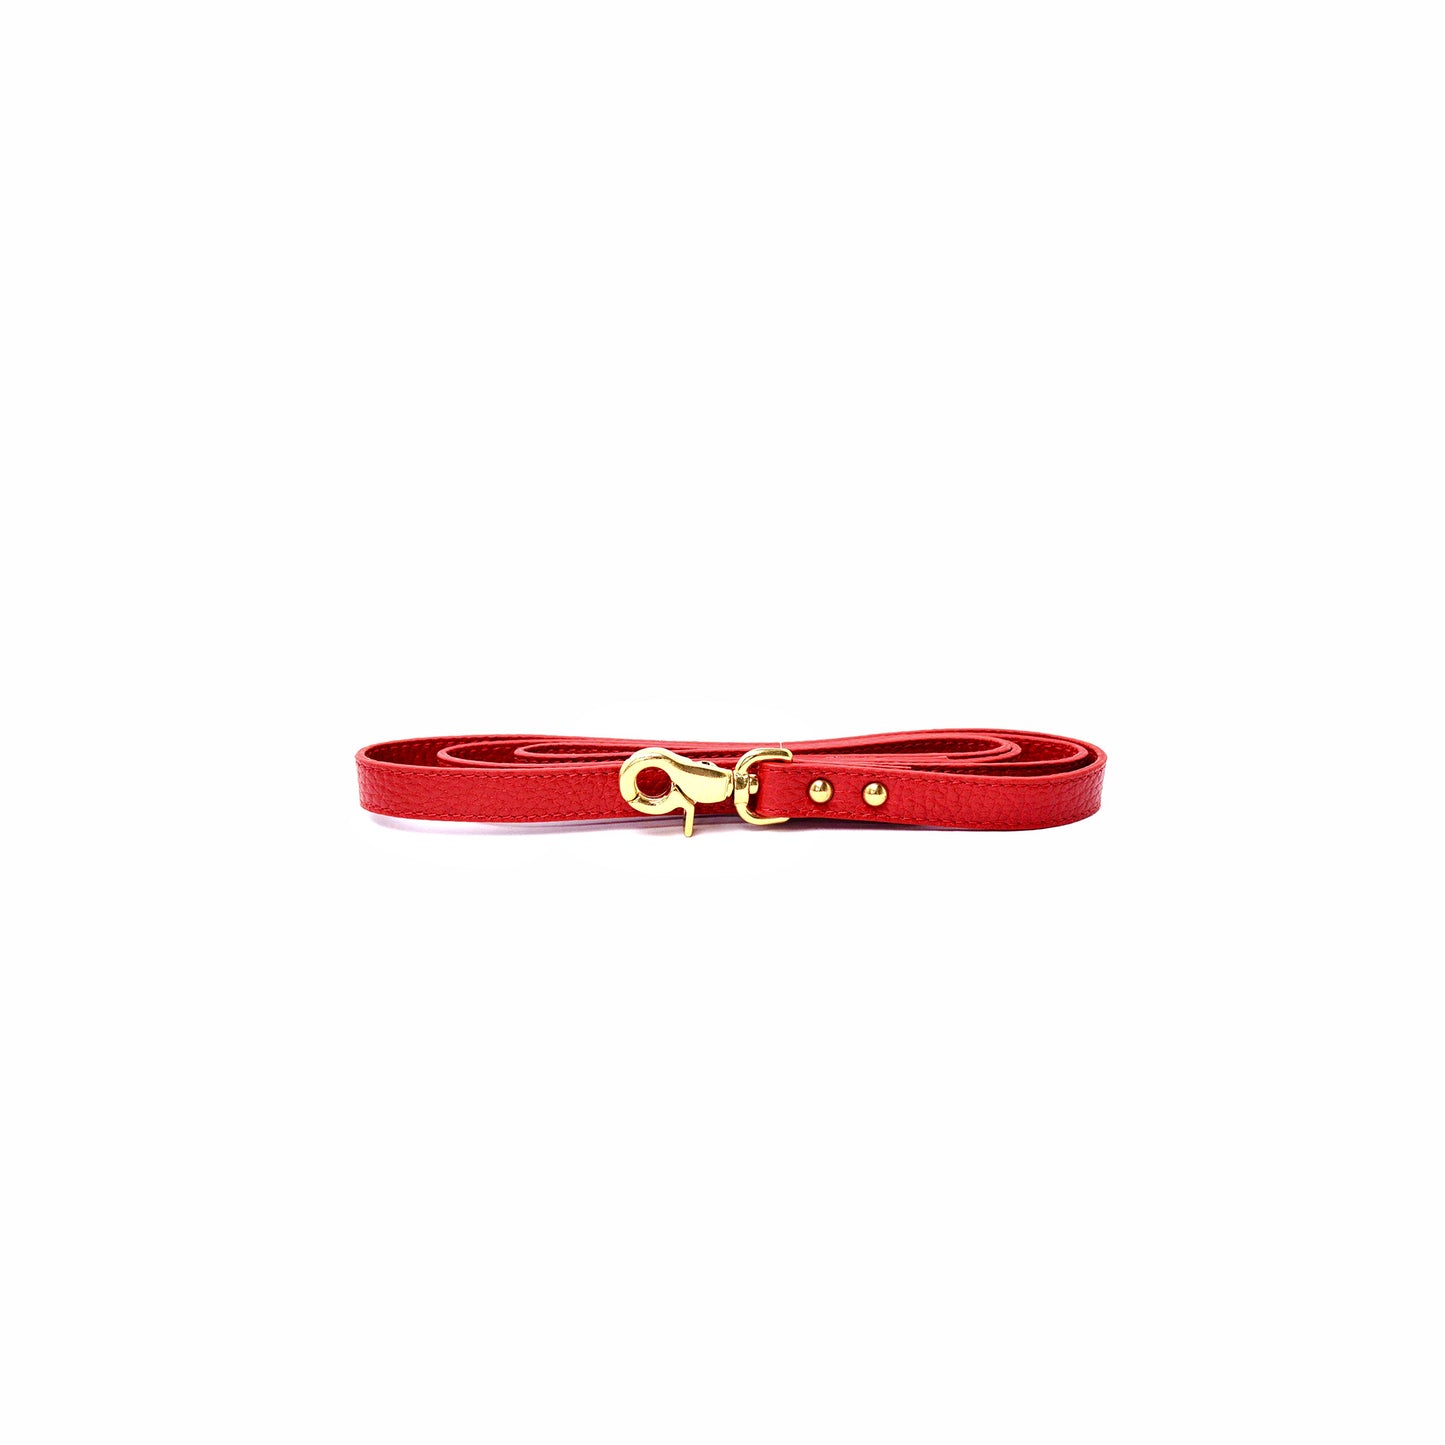 Balley Dog Leash Red